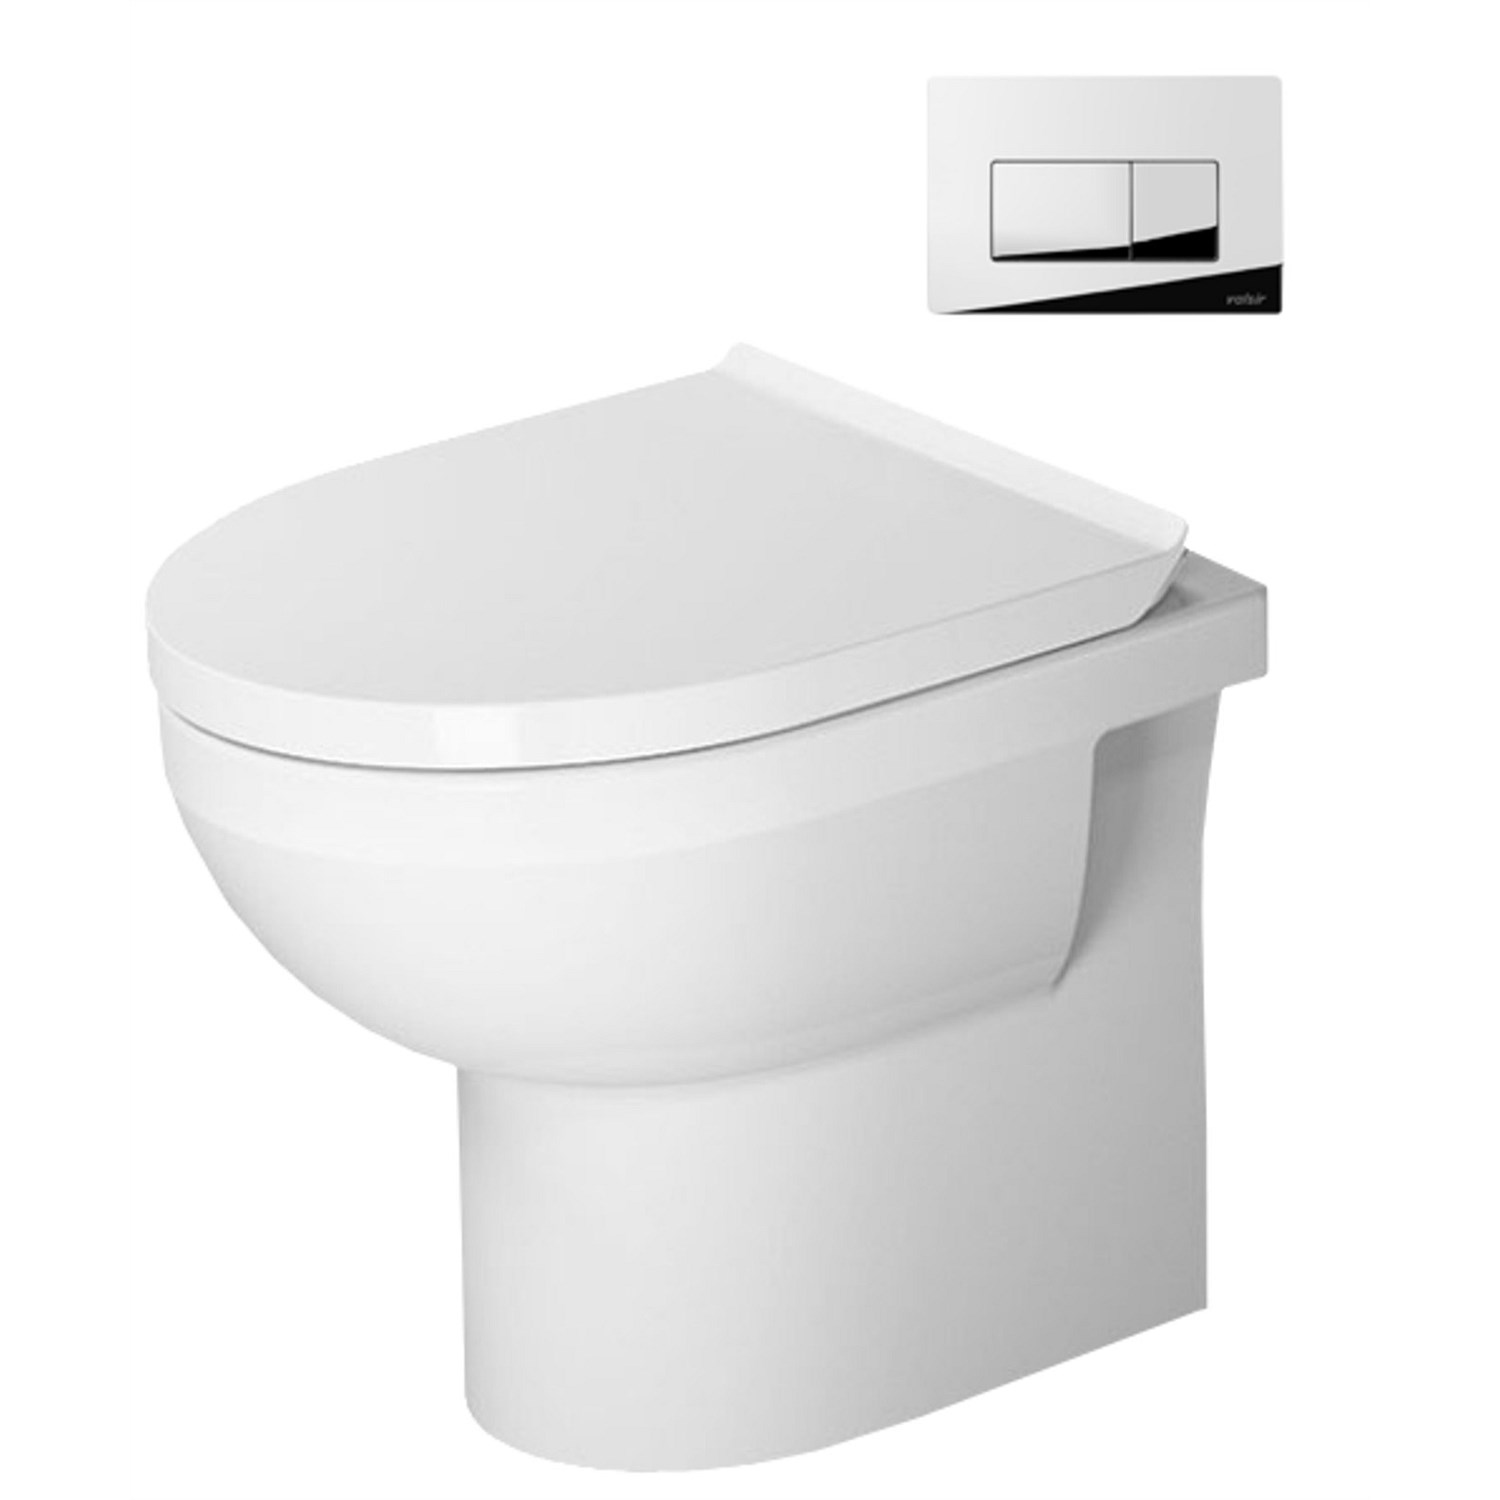 Wall-Hung - Duravit DuraStyle Basic Compact Rimless Toilet Suite